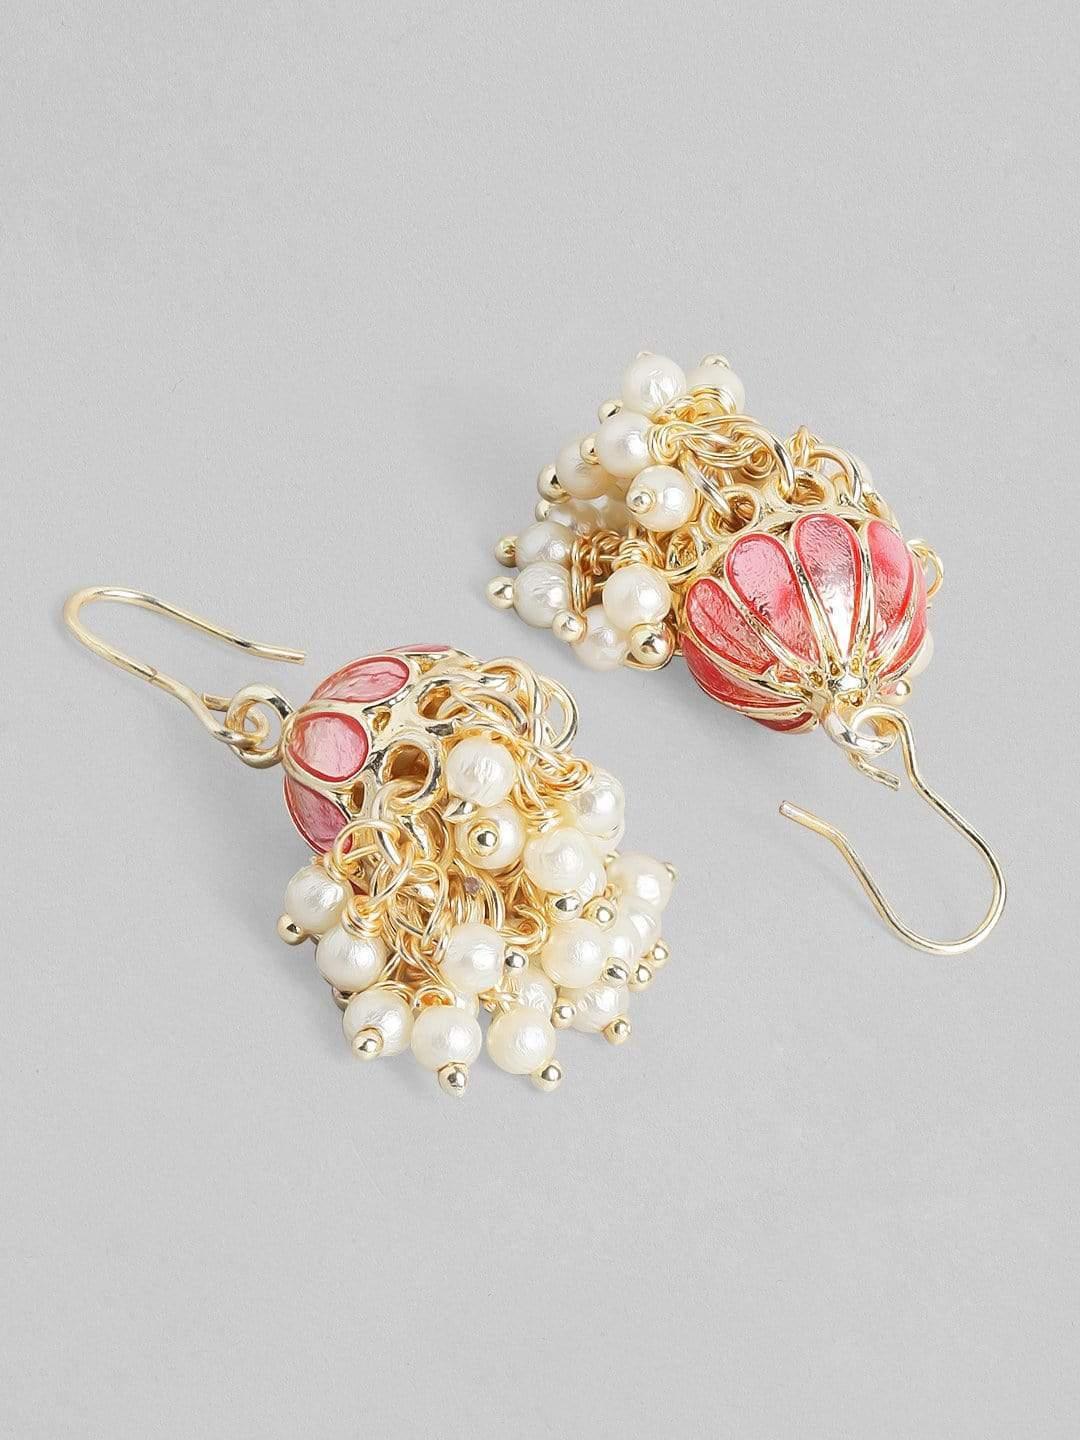 Gold Plated Handcrafted Enamel Pink Small Jhumka Earrings - Indiakreations